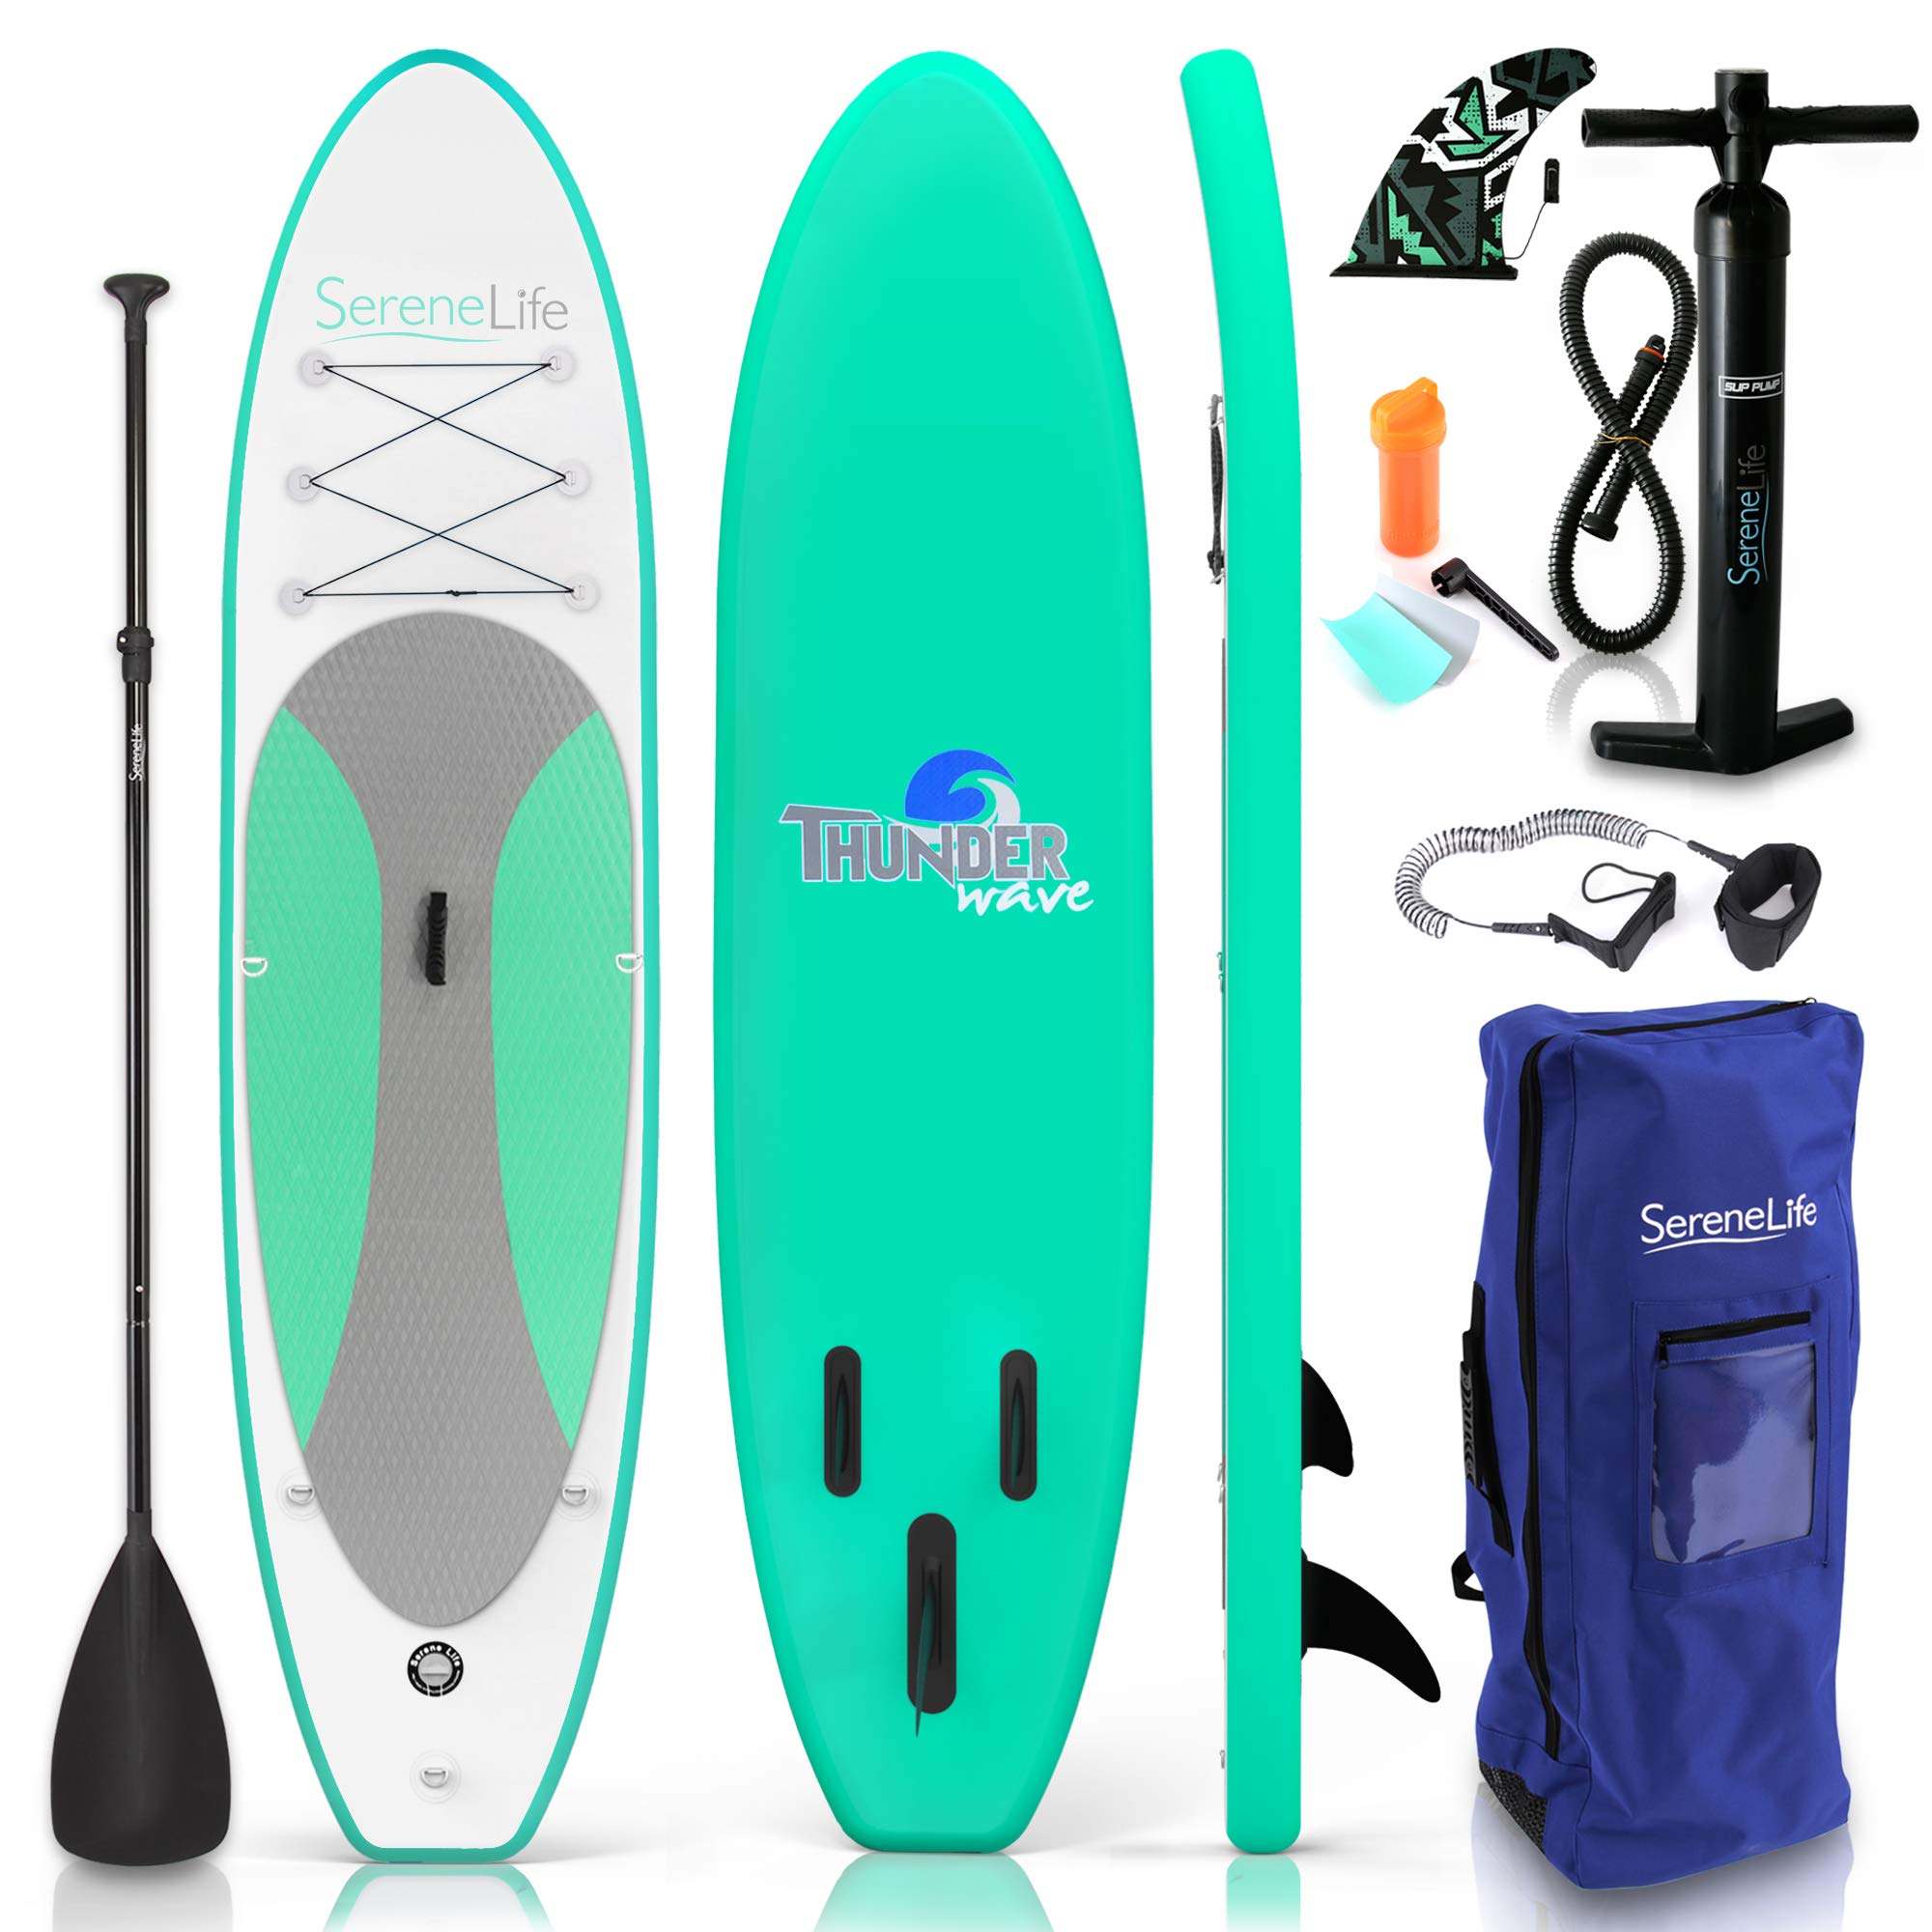 SereneLife Inflatable Stand Up Paddle Board (6 Inches Thick) with Premium SUP Accessories & Carry Bag | Wide Stance, Bottom Fin for Paddling, Surf Control $199.99